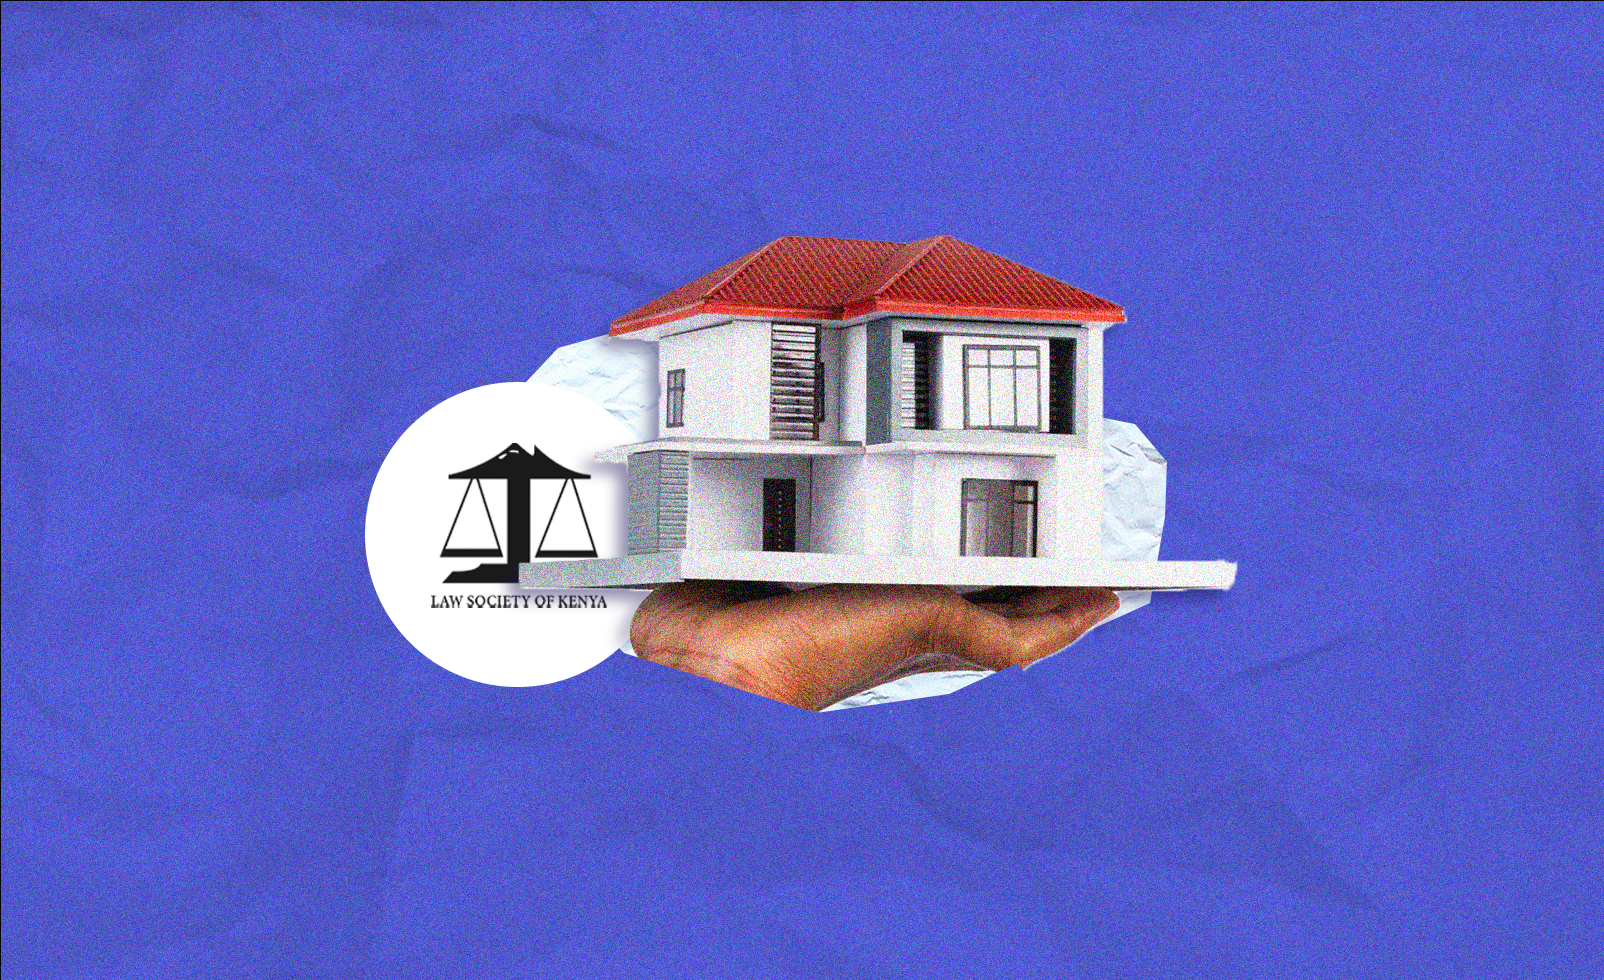 The Law Society Of Kenya (LSK) Ventures Into Real Estate Development Through Mixed Use Projects In Nairobi